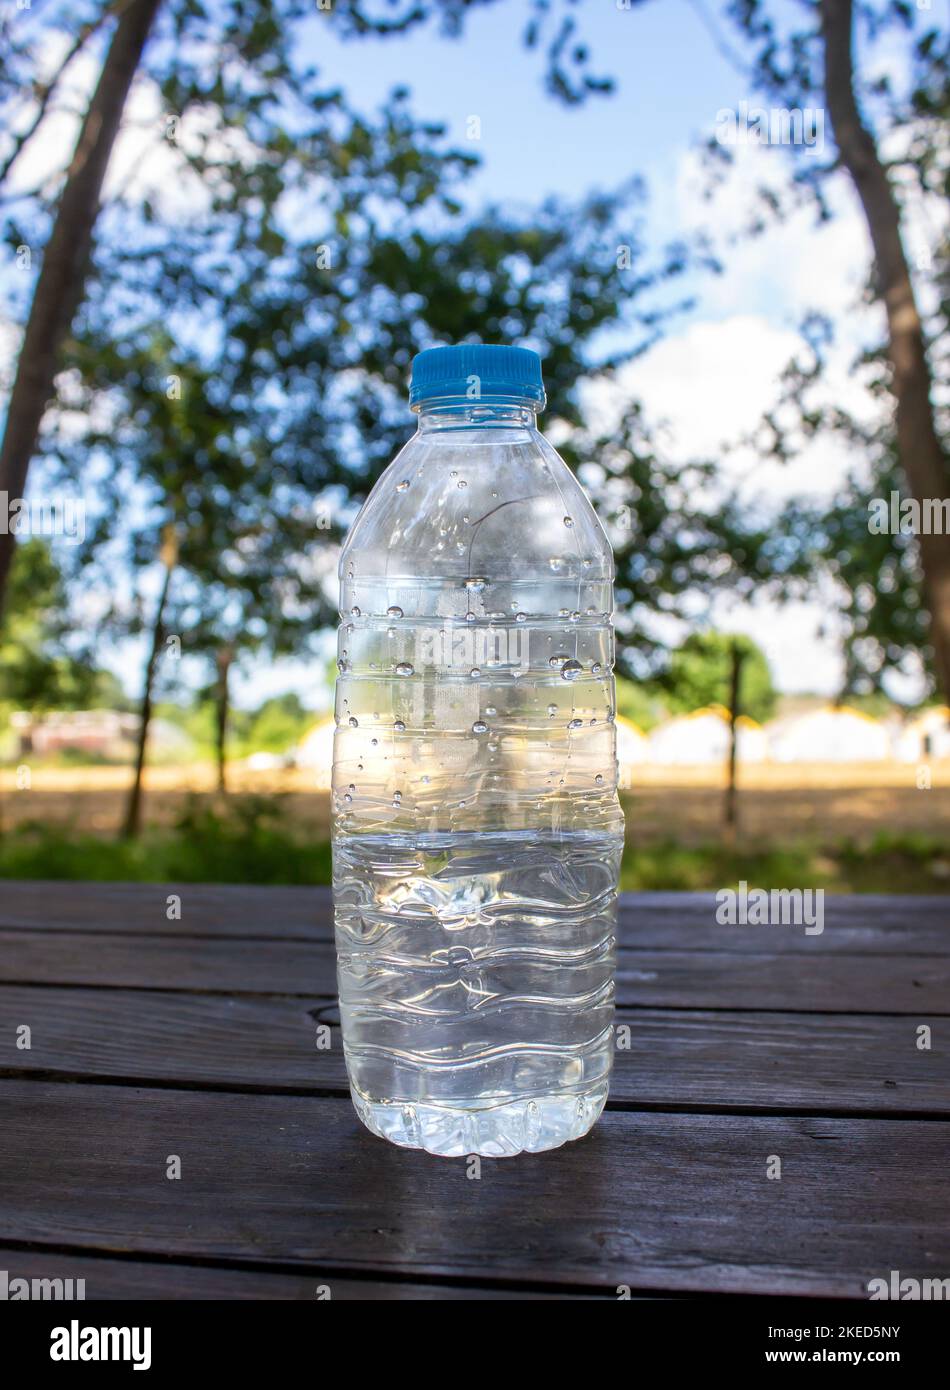 Cold Natural Spring Water with drops in small plastic bottles on white  marble table Stock Photo - Alamy